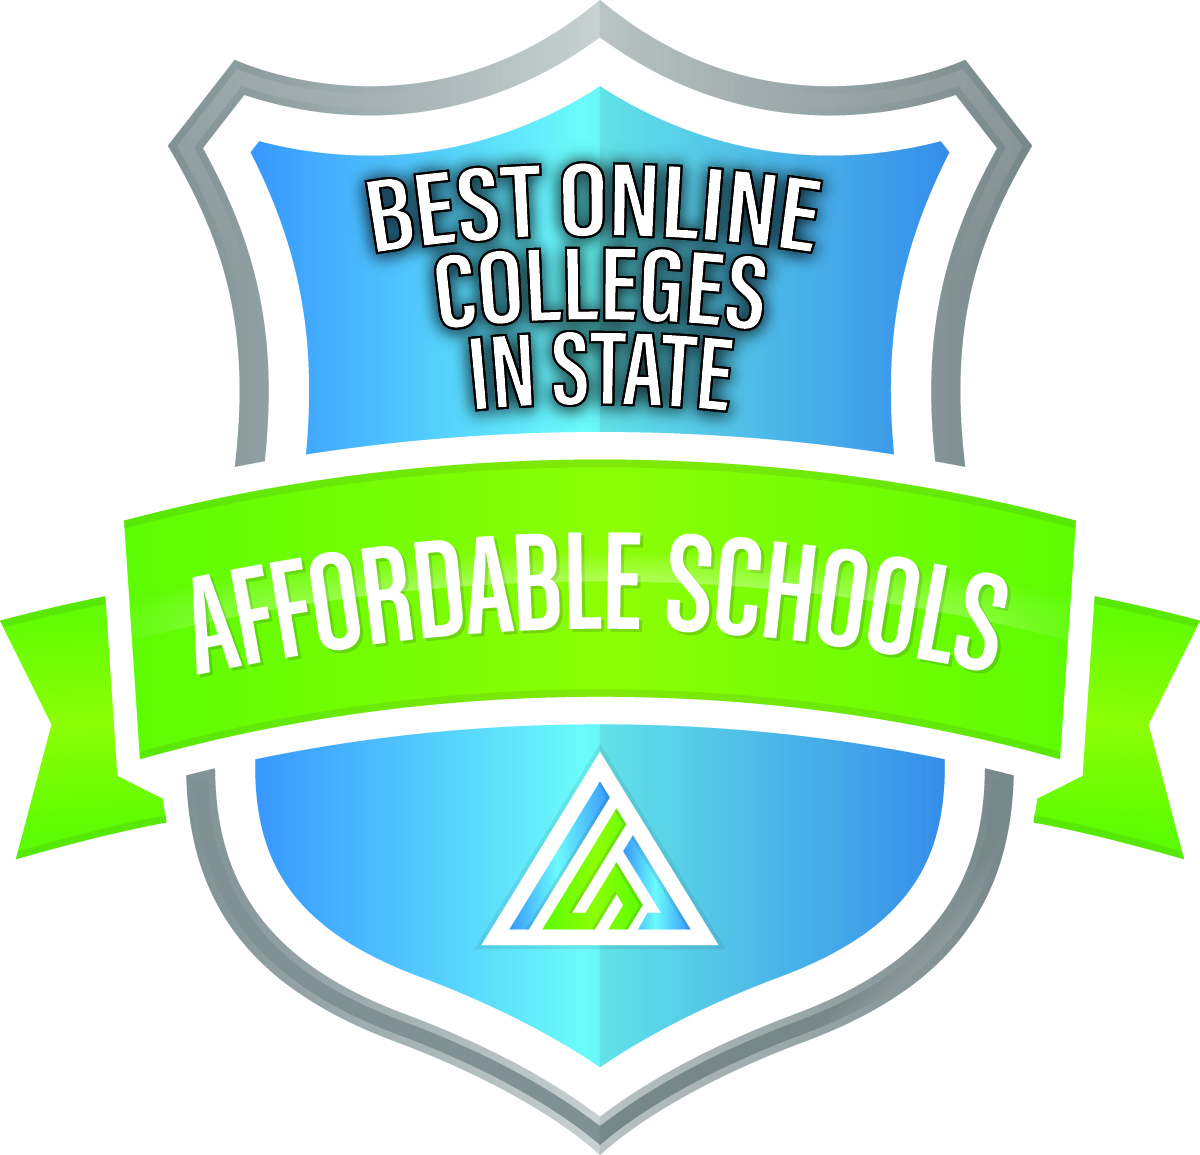 10 Most Affordable Online Colleges in Georgia 2020 - Affordable Schools